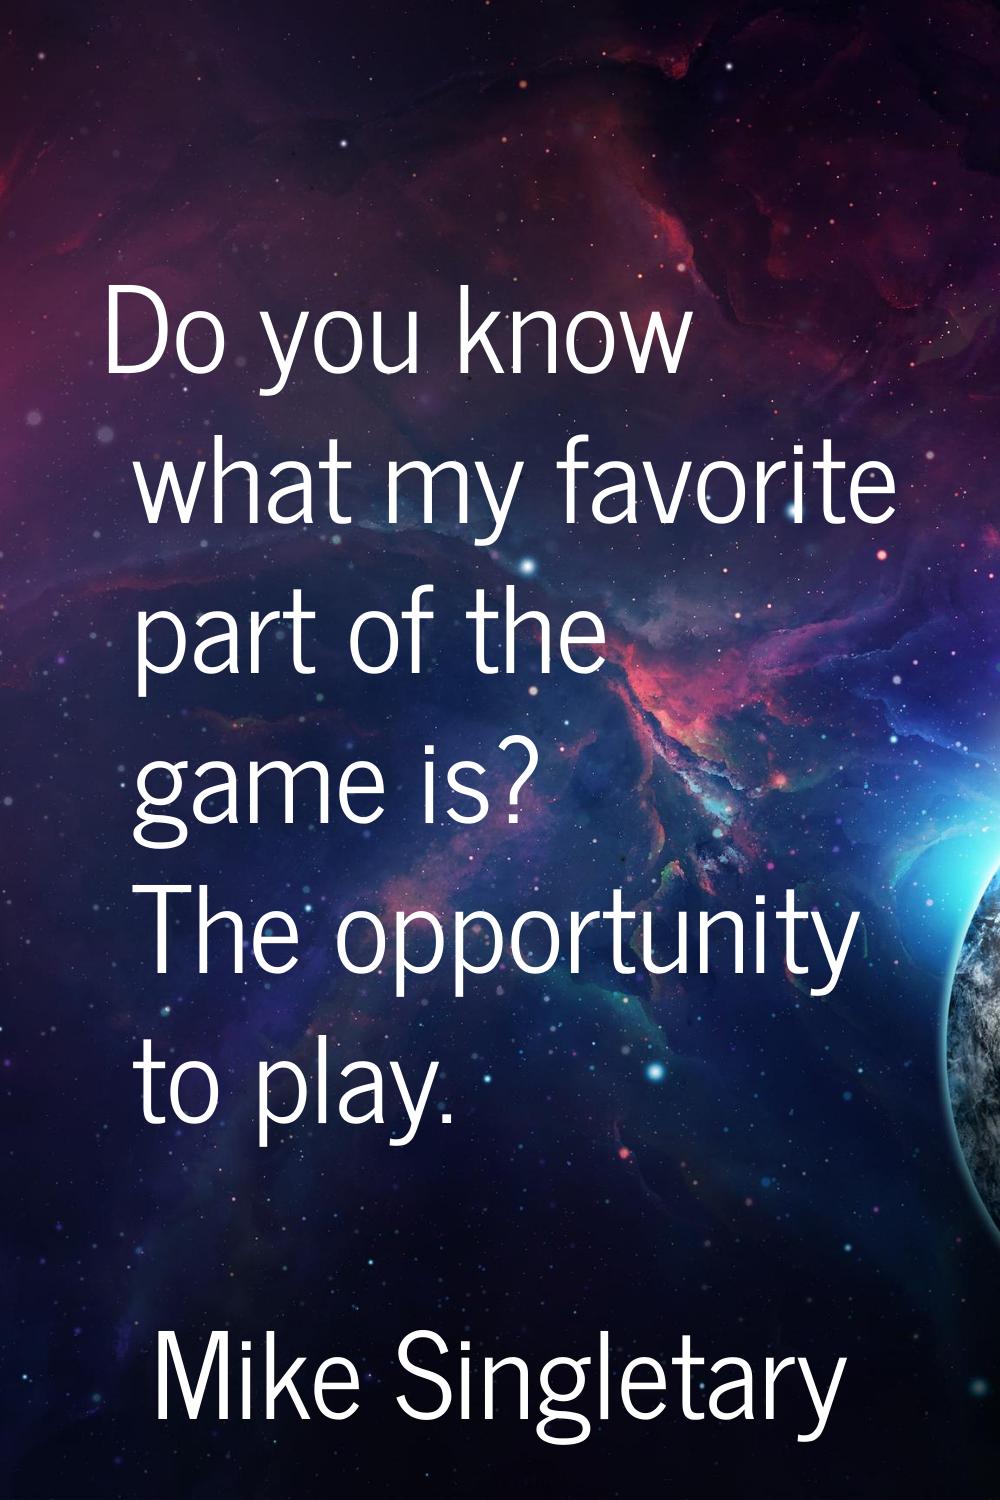 Do you know what my favorite part of the game is? The opportunity to play.